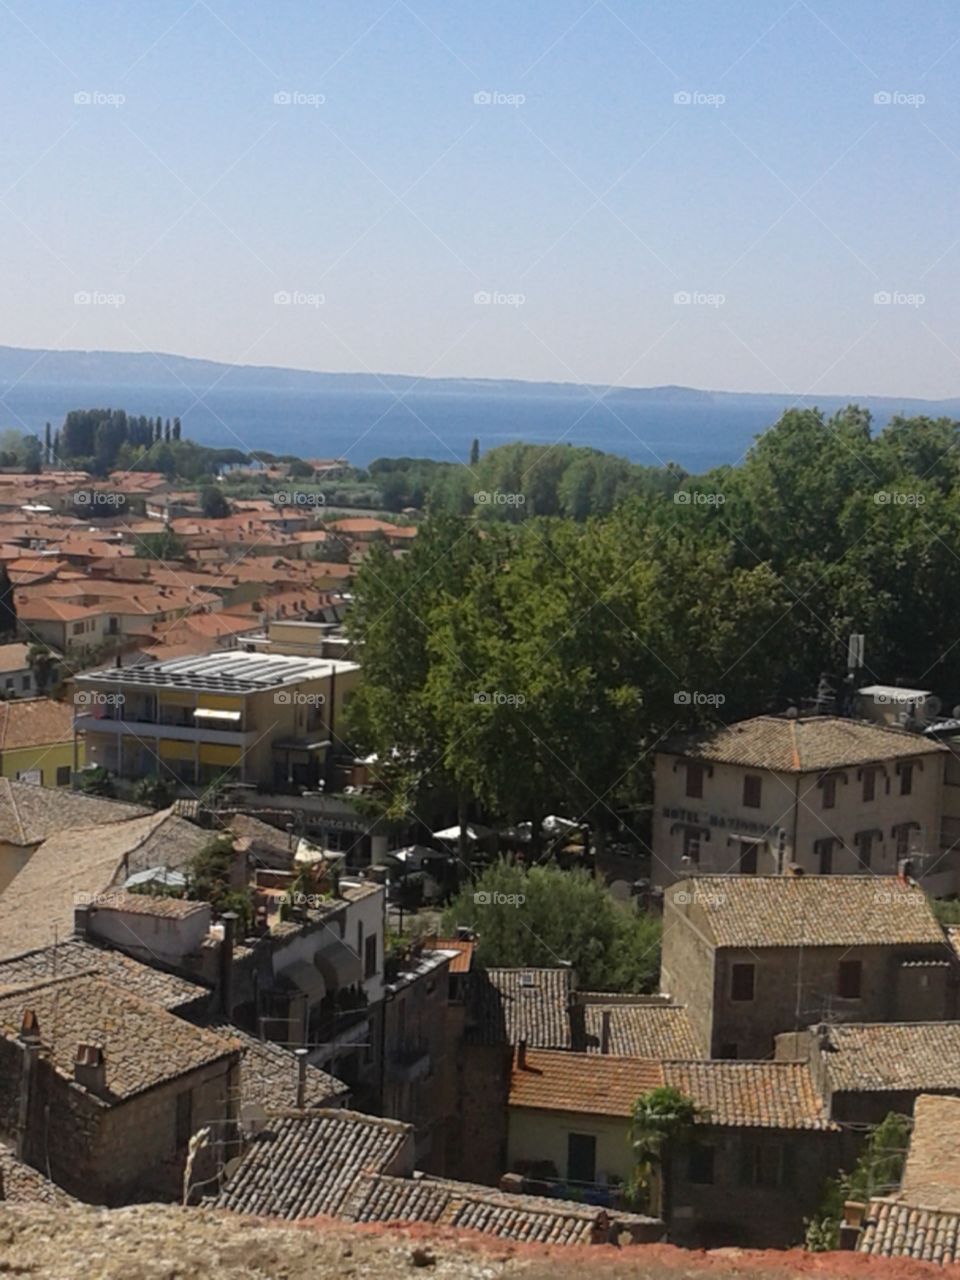 bolsena lake - italy. my last Holiday. fuor days in August